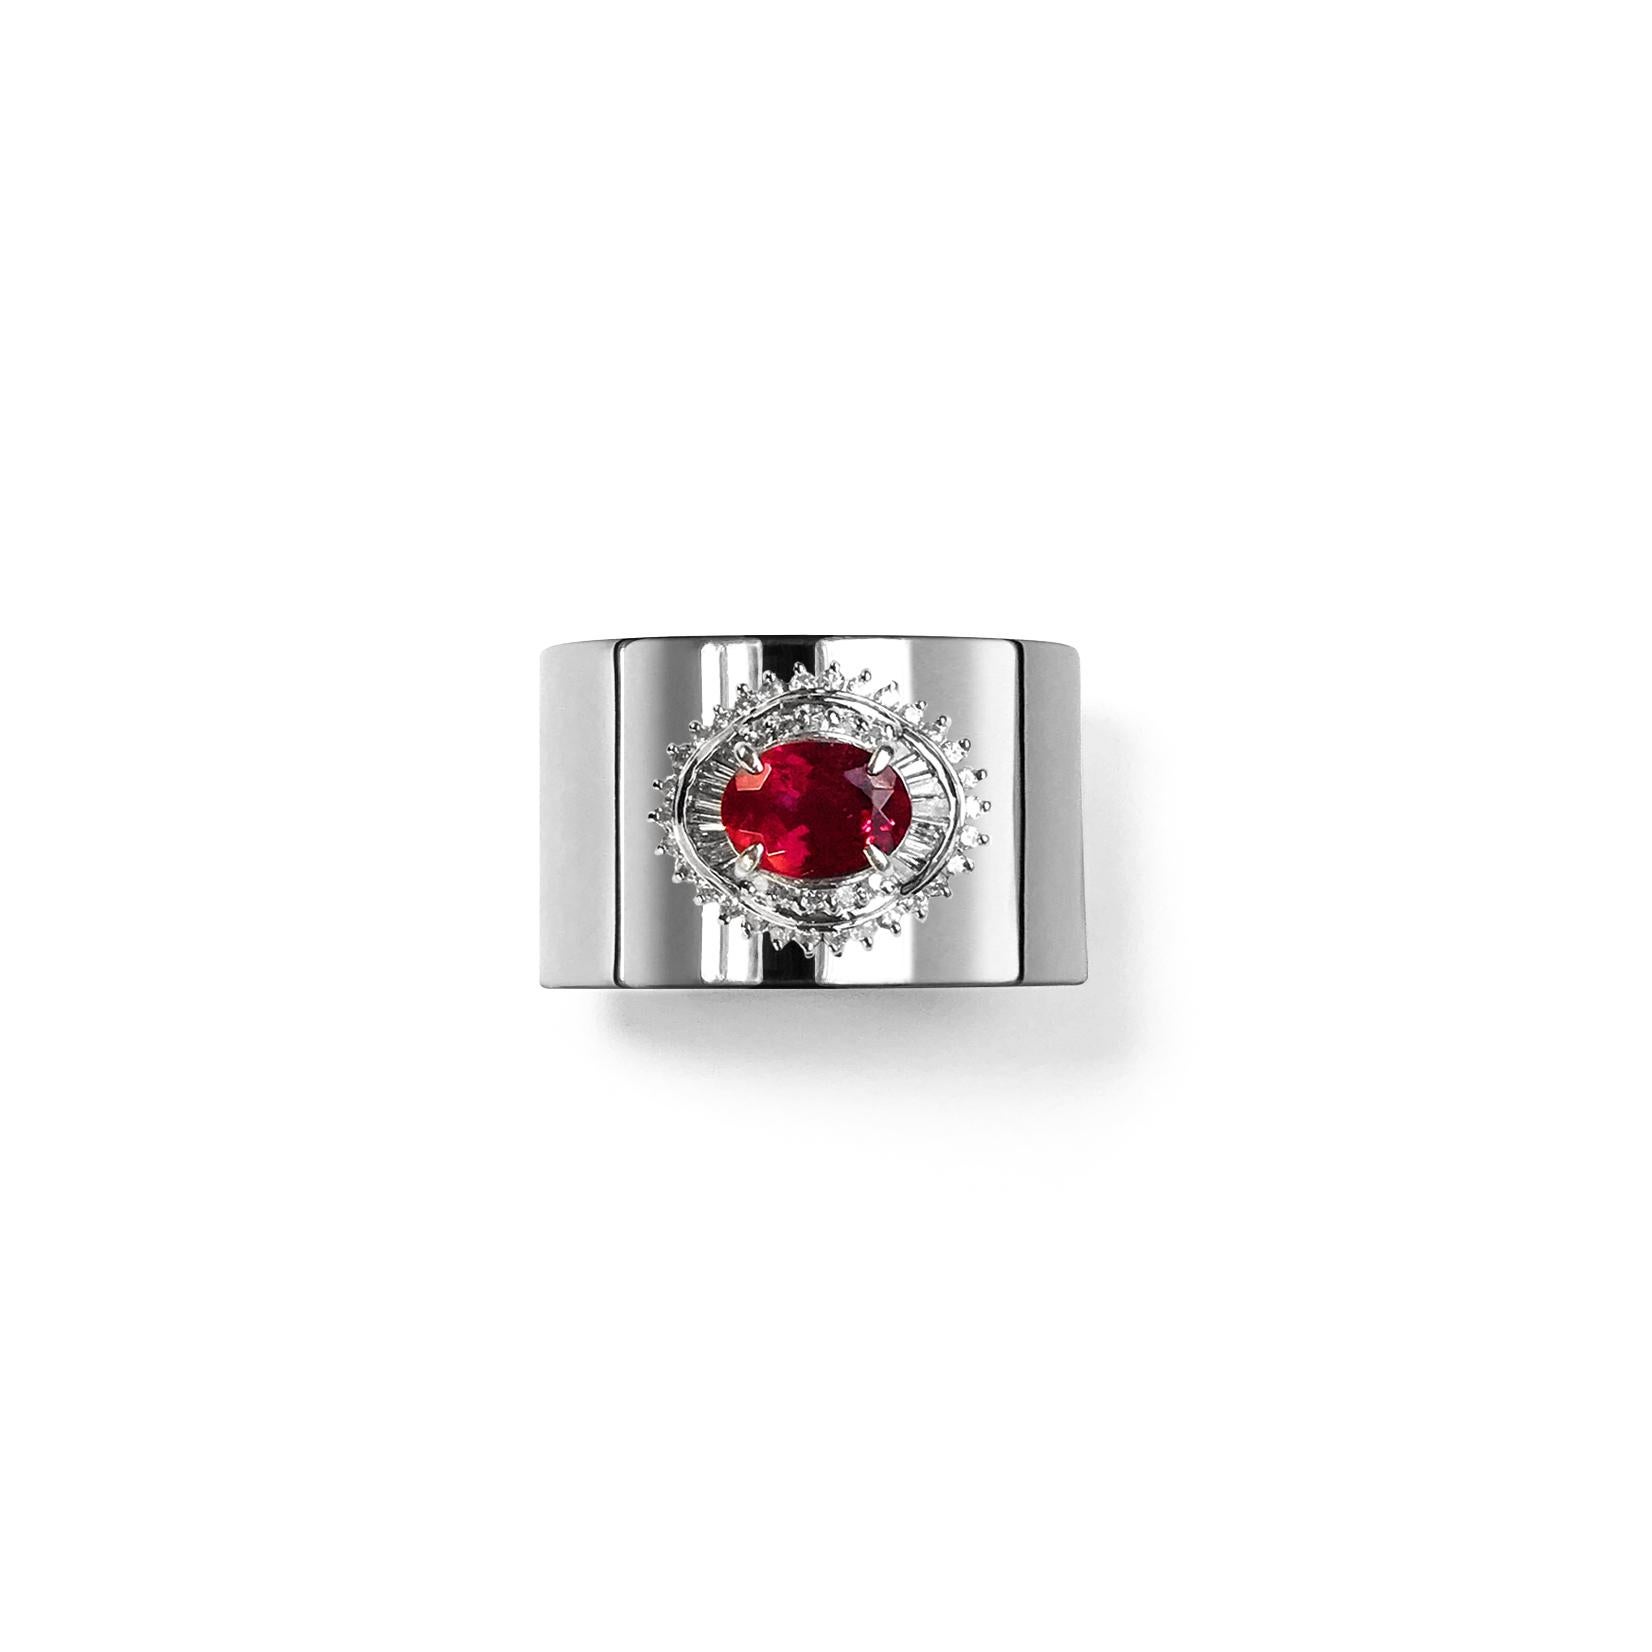 This luxurious wide-band platinum ring features deconstructed elements from repurposed vintage Tourmaline stone settings in the center. These rare and classic settings were made by highly skilled craftsmen and includes brilliant cut diamonds. This